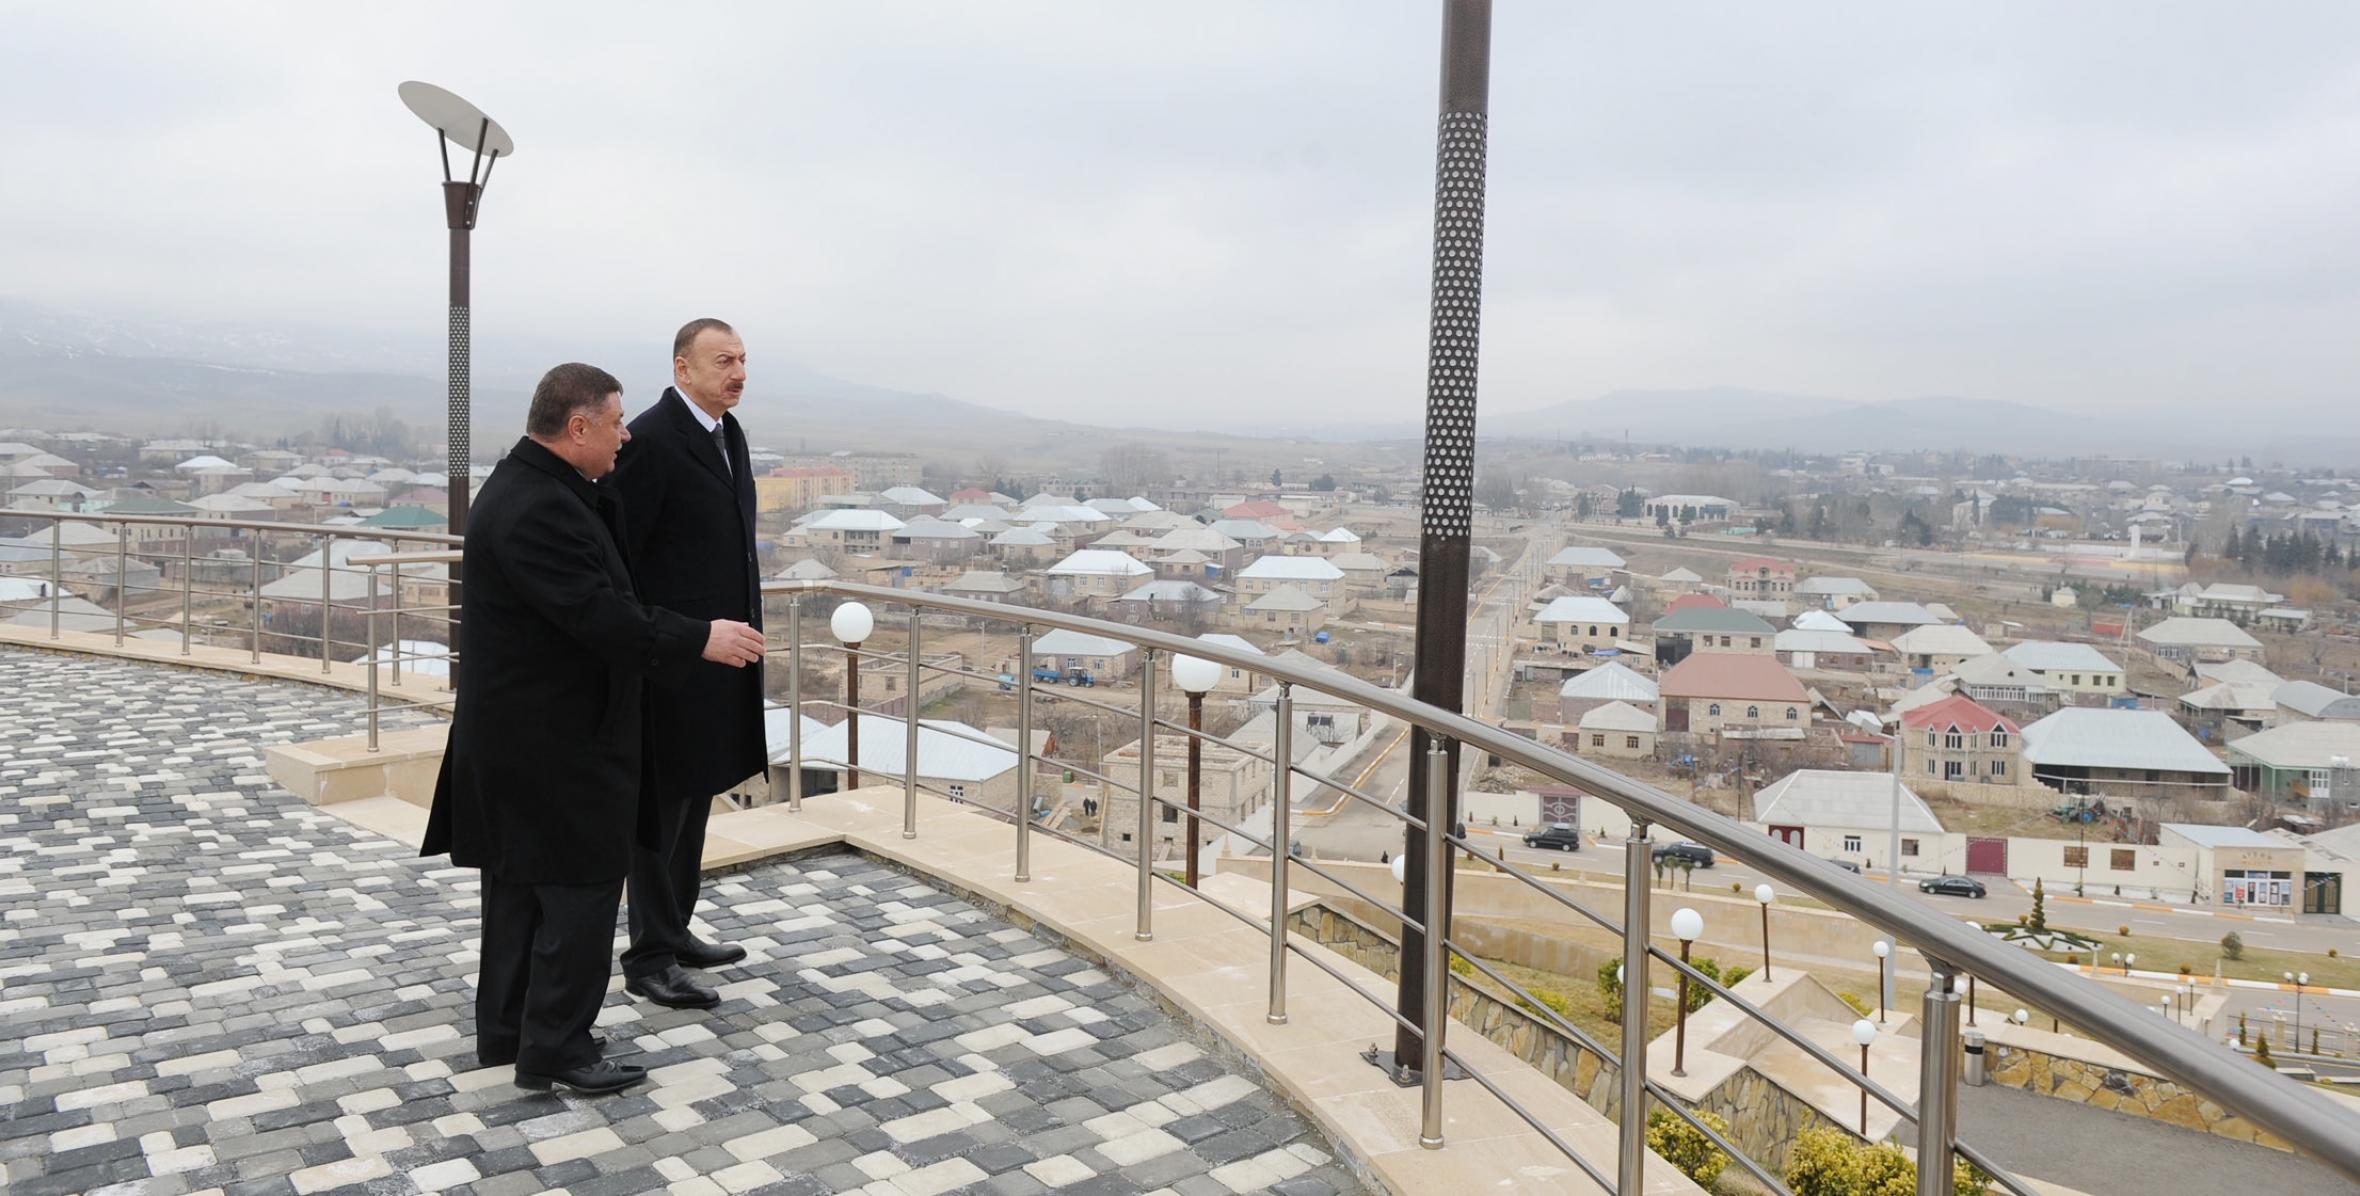 As part of a visit to Goygol, Ilham Aliyev attended the opening of a Flag Square Complex